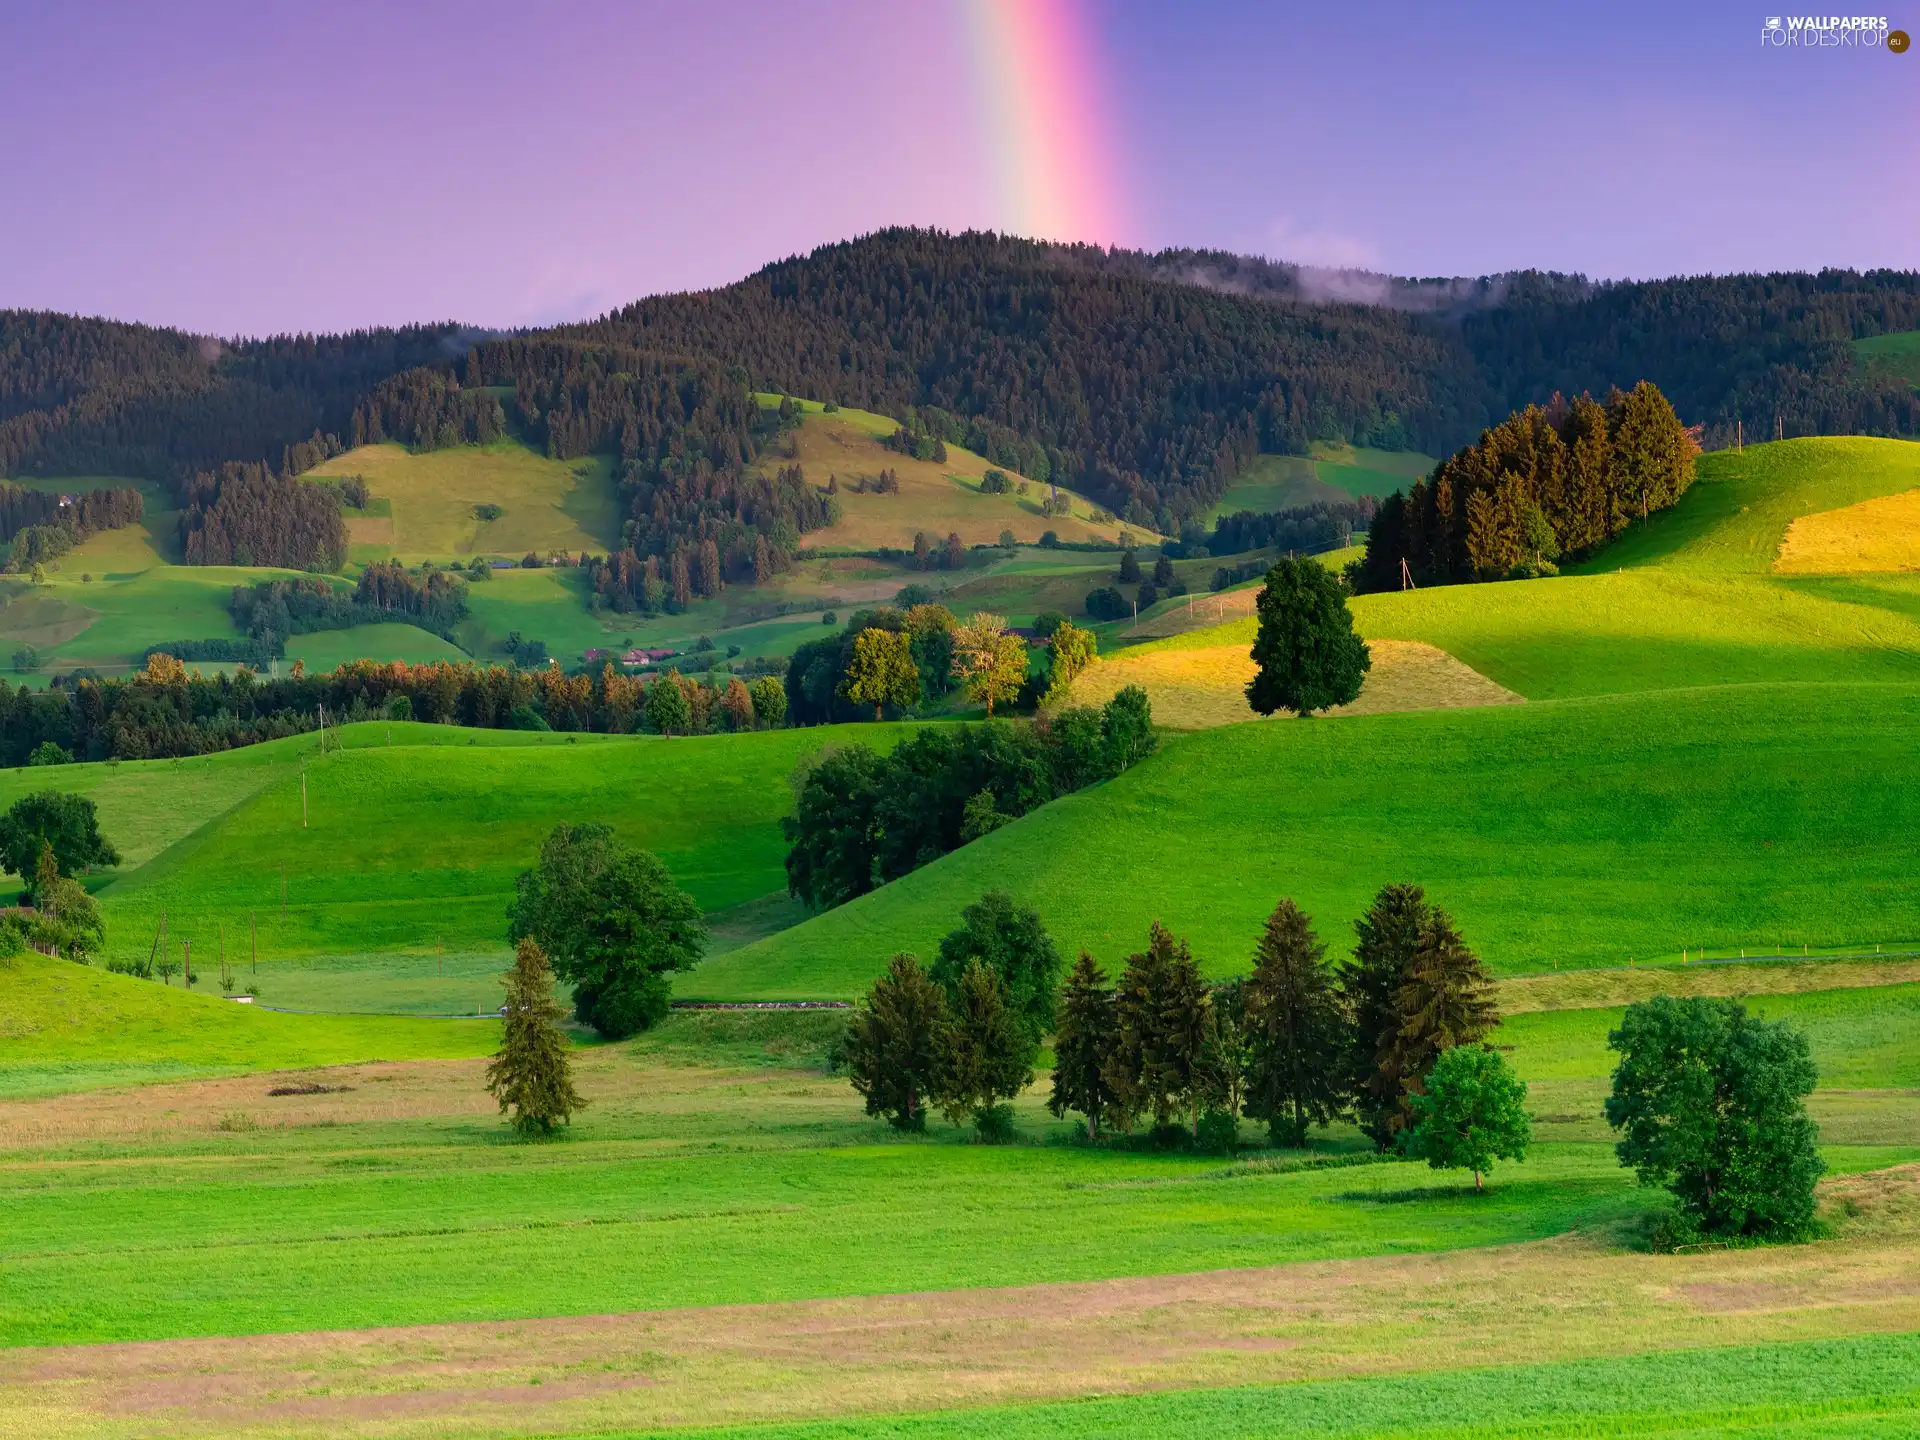 viewes, forest, The Hills, trees, Great Rainbows, Mountains, field